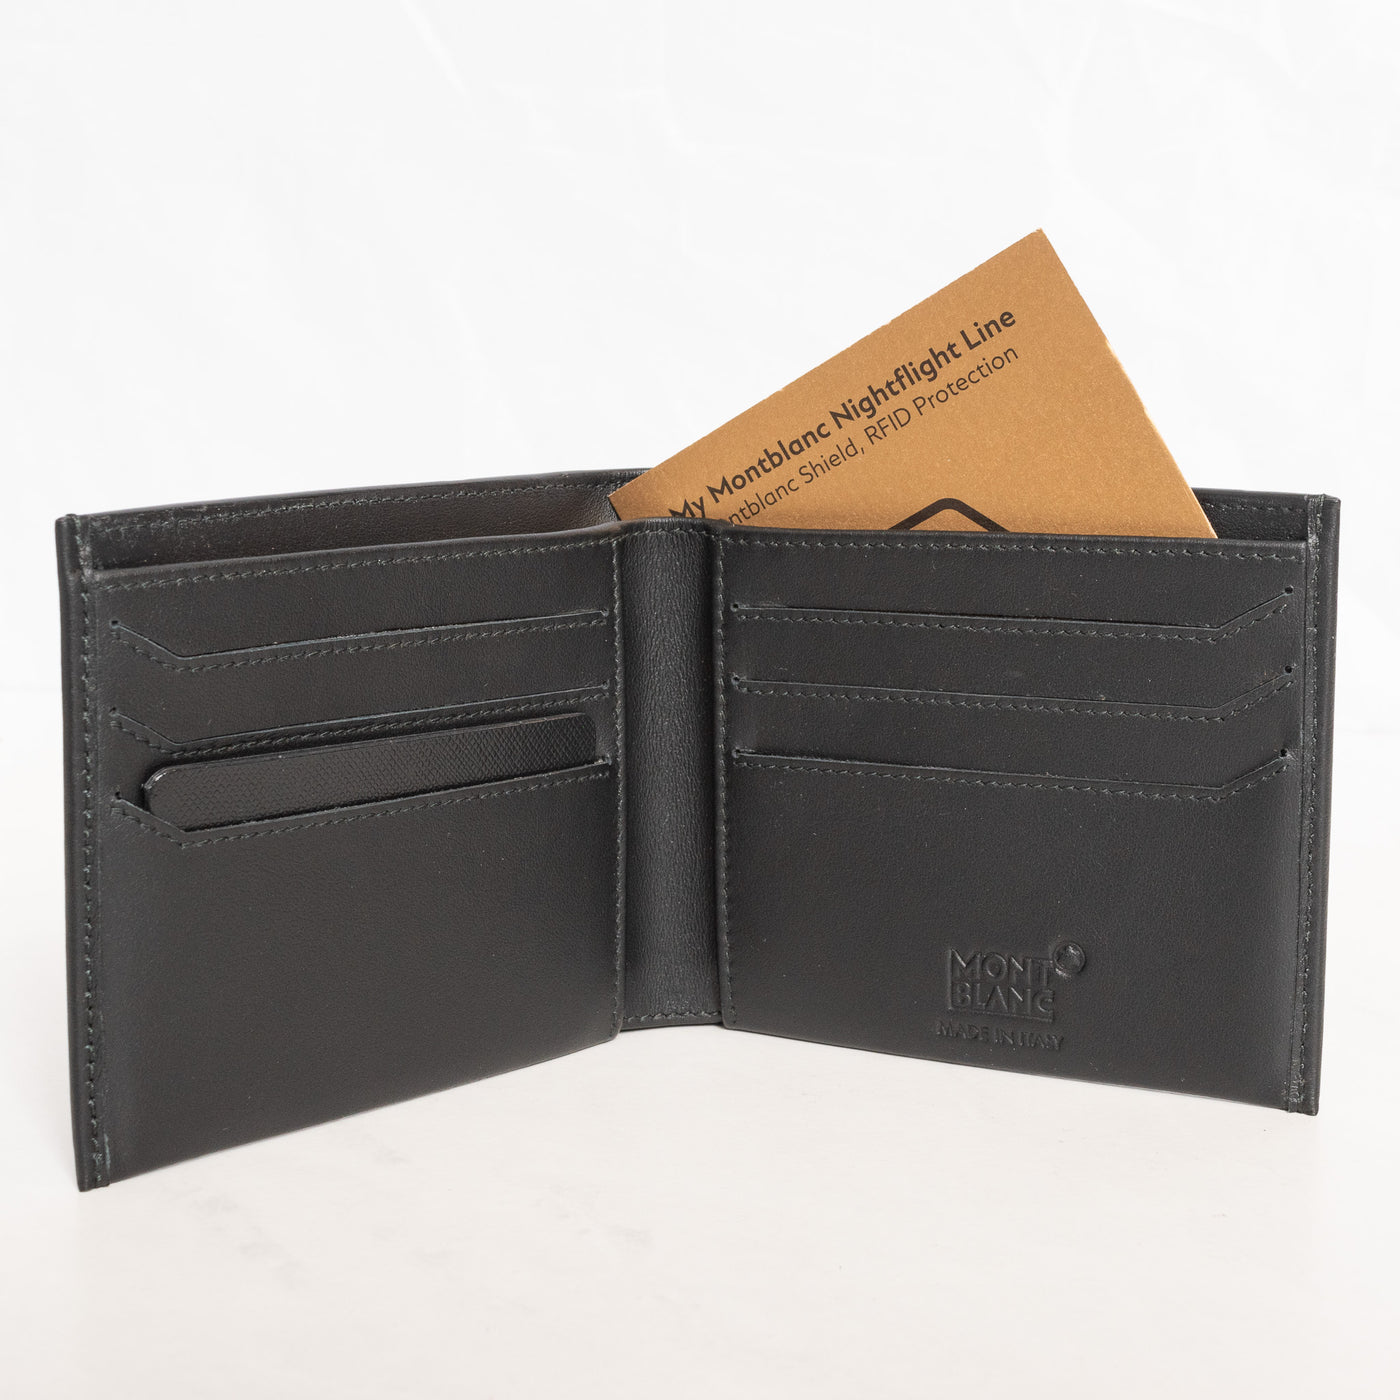 Montblanc Leather Goods Nightflight Black 6cc Wallet 118274 - Preowned Opened With Card